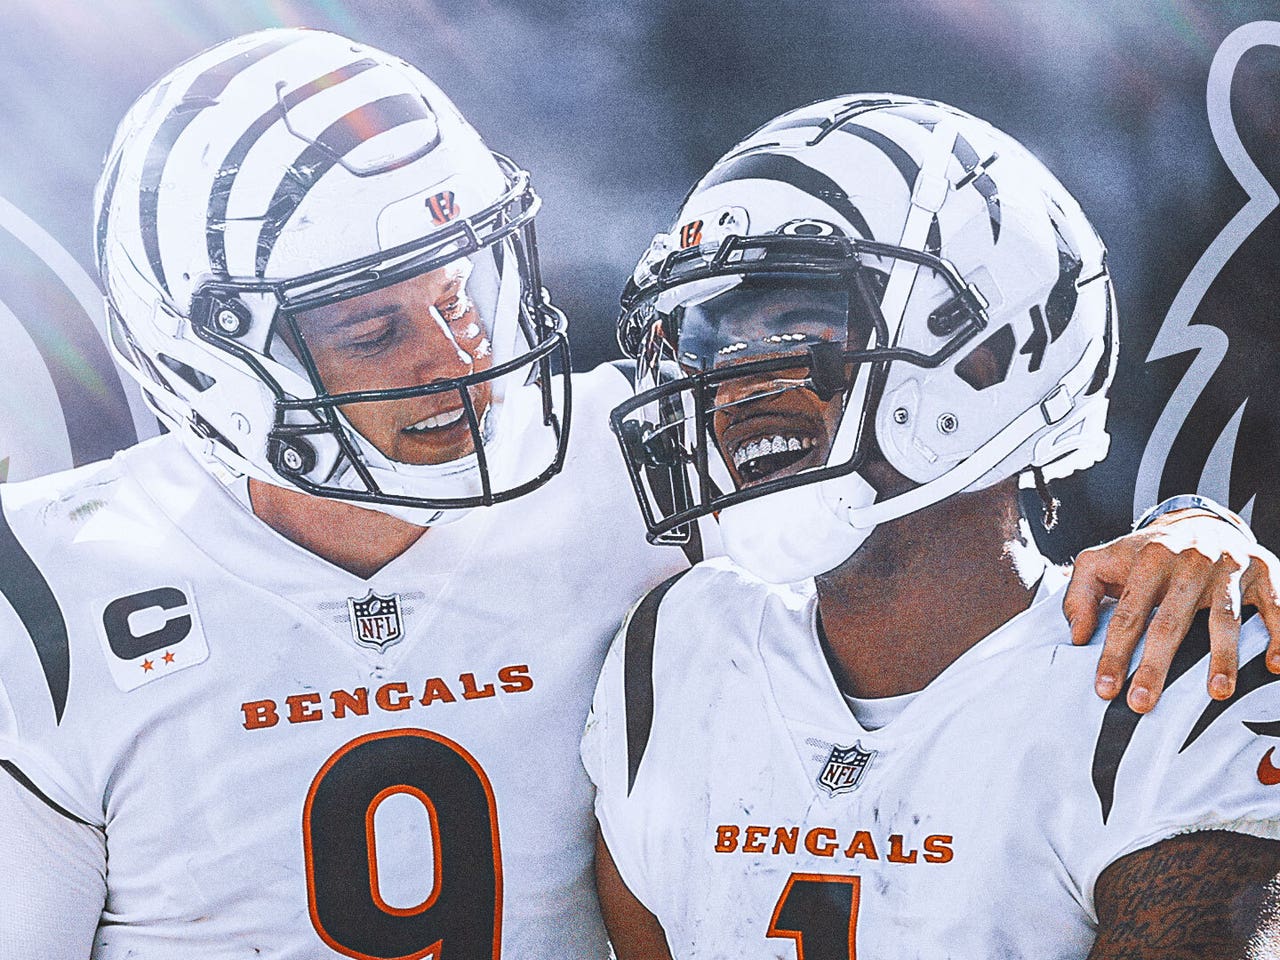 Why don't the Bengals wear white helmets?